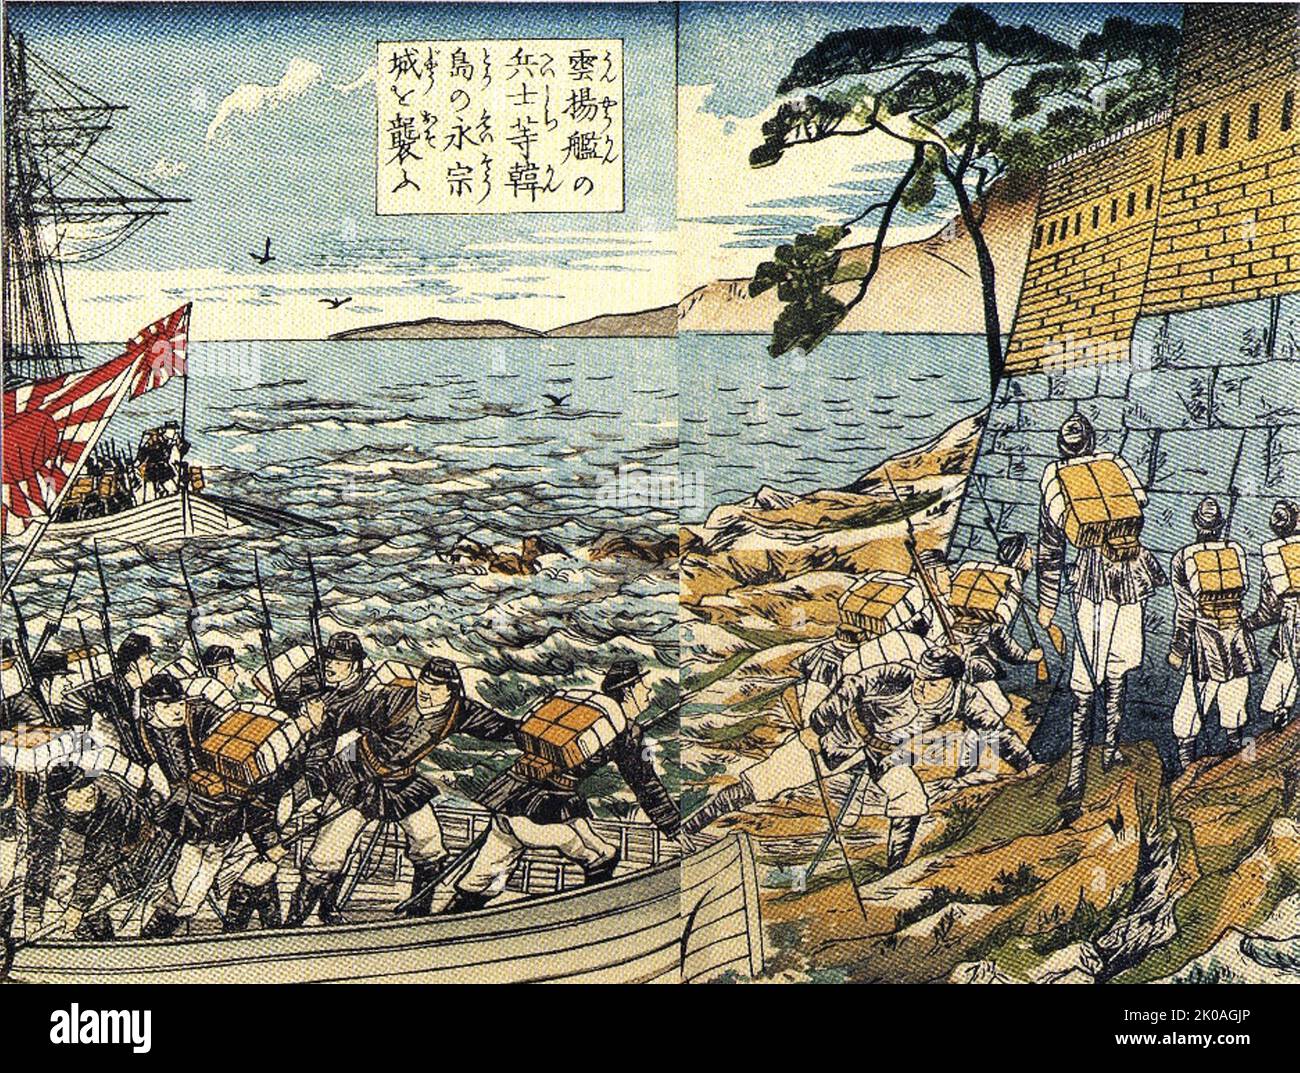 depiction of the Ganghwa Island incident, an armed encounter between the Joseon Dynasty of Korea and Japan in the vicinity of Ganghwa Island, showing Japanese marines from the gunboat Un'yo landing on Yeongjong Island on 20 September 1875 to attack the Yeongjong castle. Stock Photo